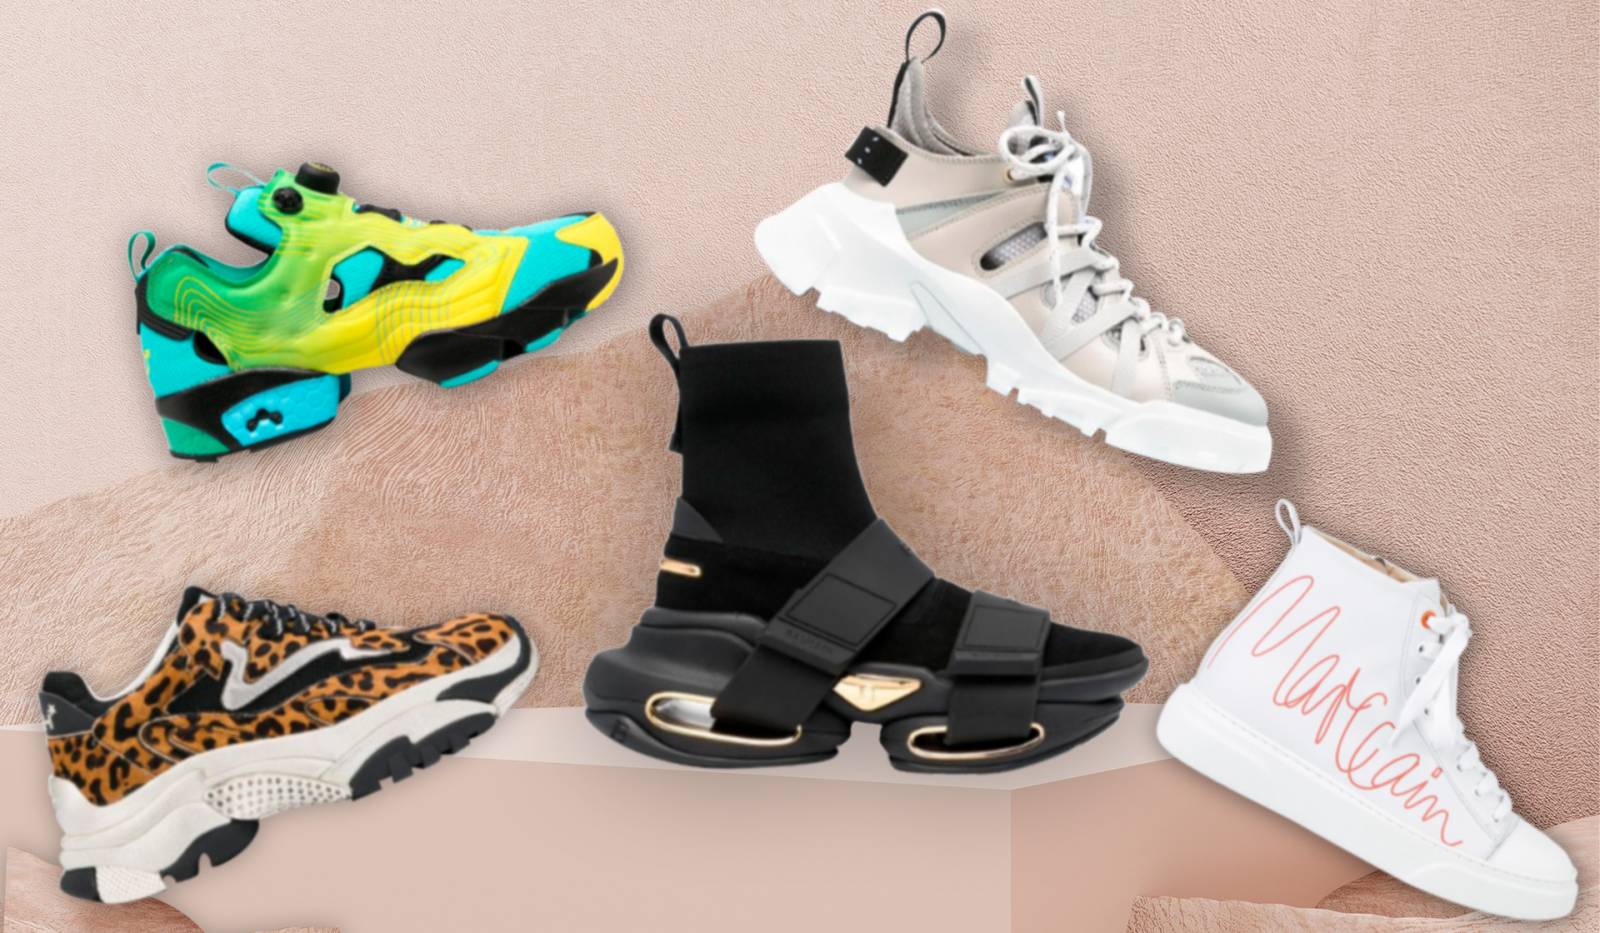 New ugly sneaker trend is elevated with chic platforms